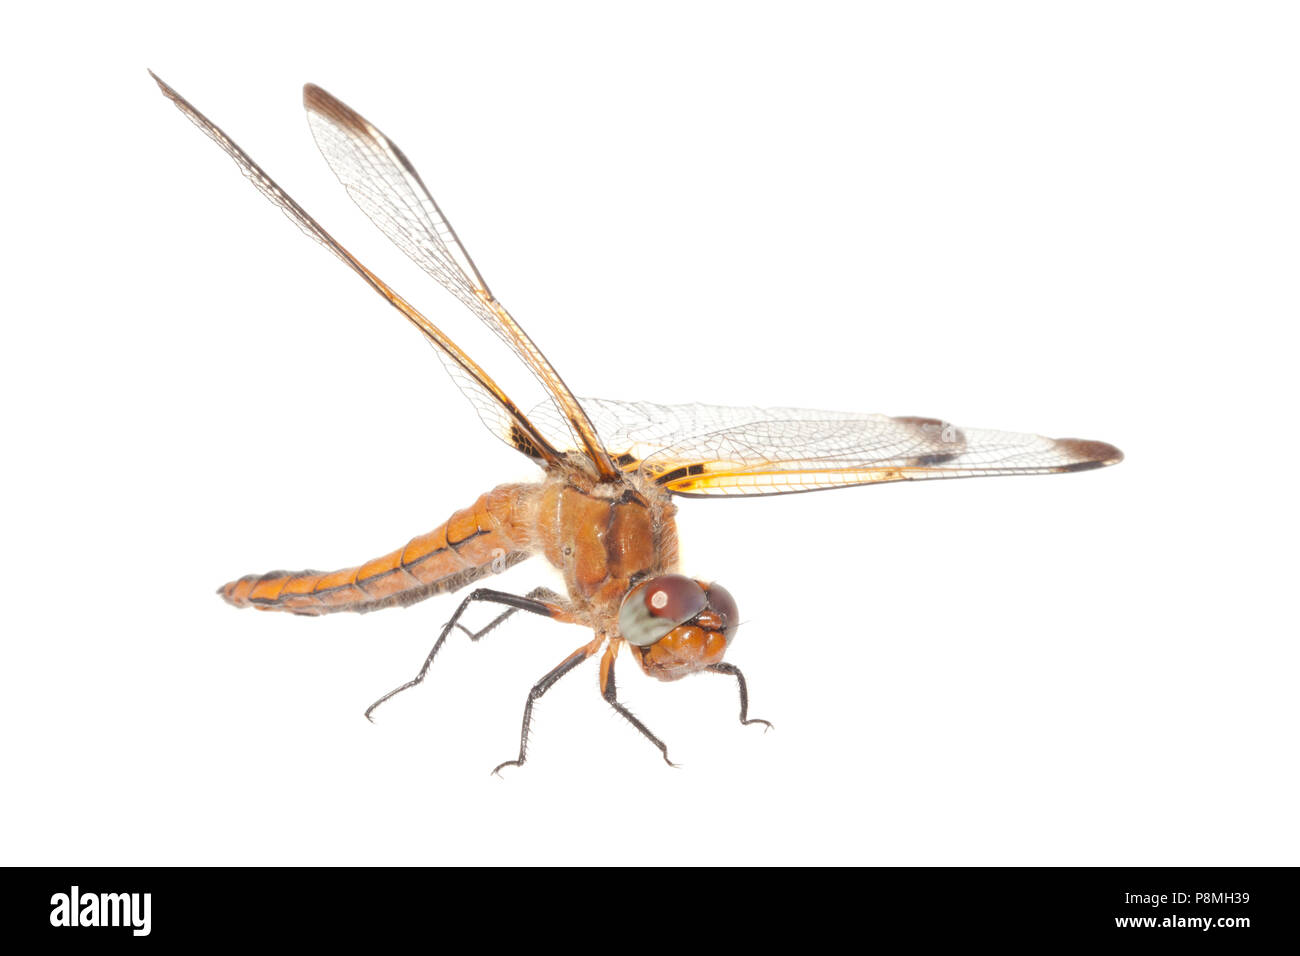 Scarce chaser isolated against a white background Stock Photo